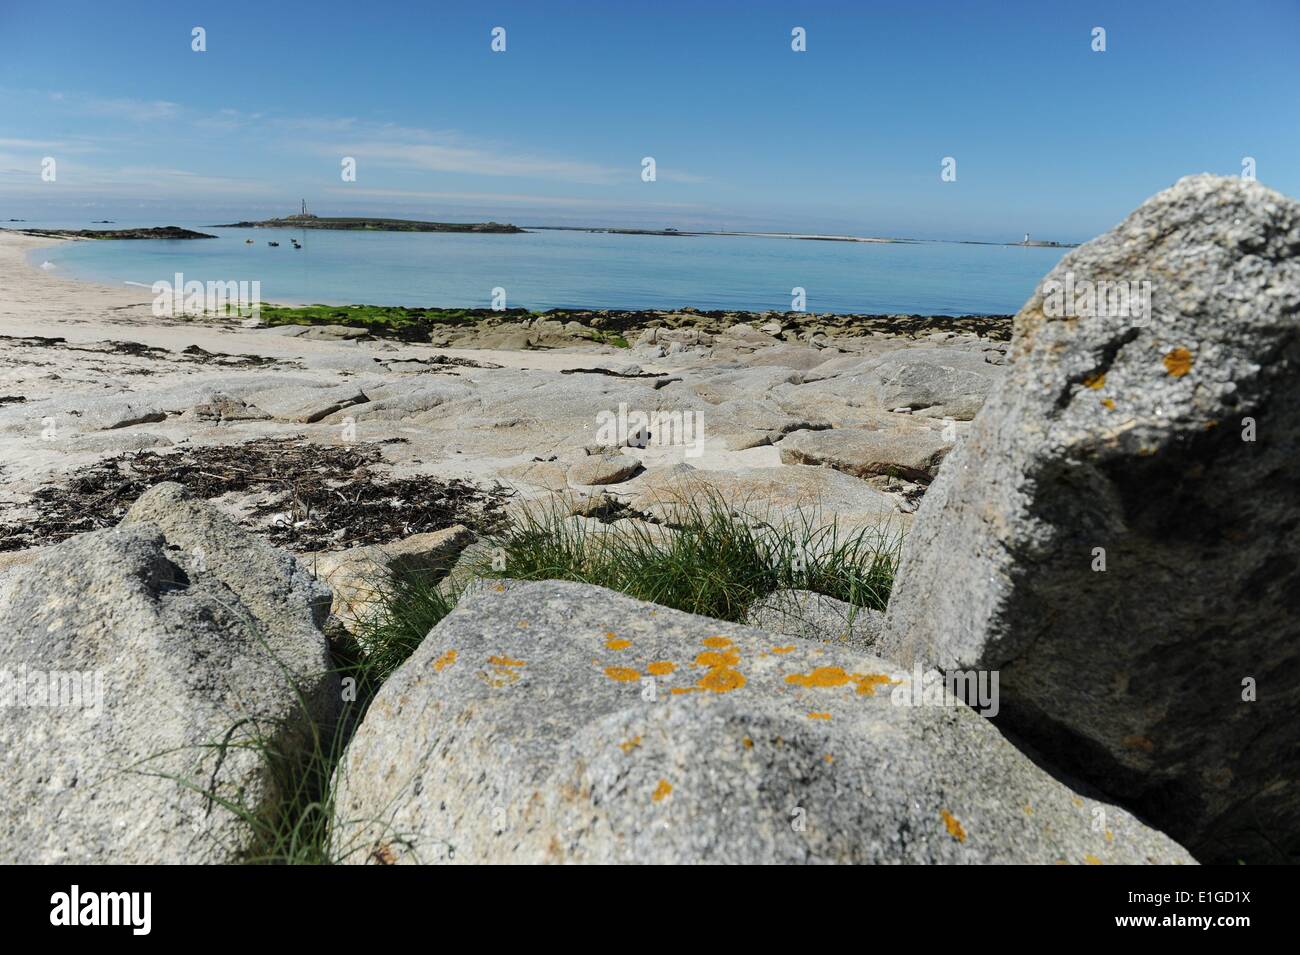 The Glénan islands (French: Îles des Glénan or Archipel des Glénan, Breton: Inizi Glenan) are an archipelago located off the coast of France. Finistere, Brittany, France, 28.May 2014. Photo: Frank May/picture alliance Stock Photo